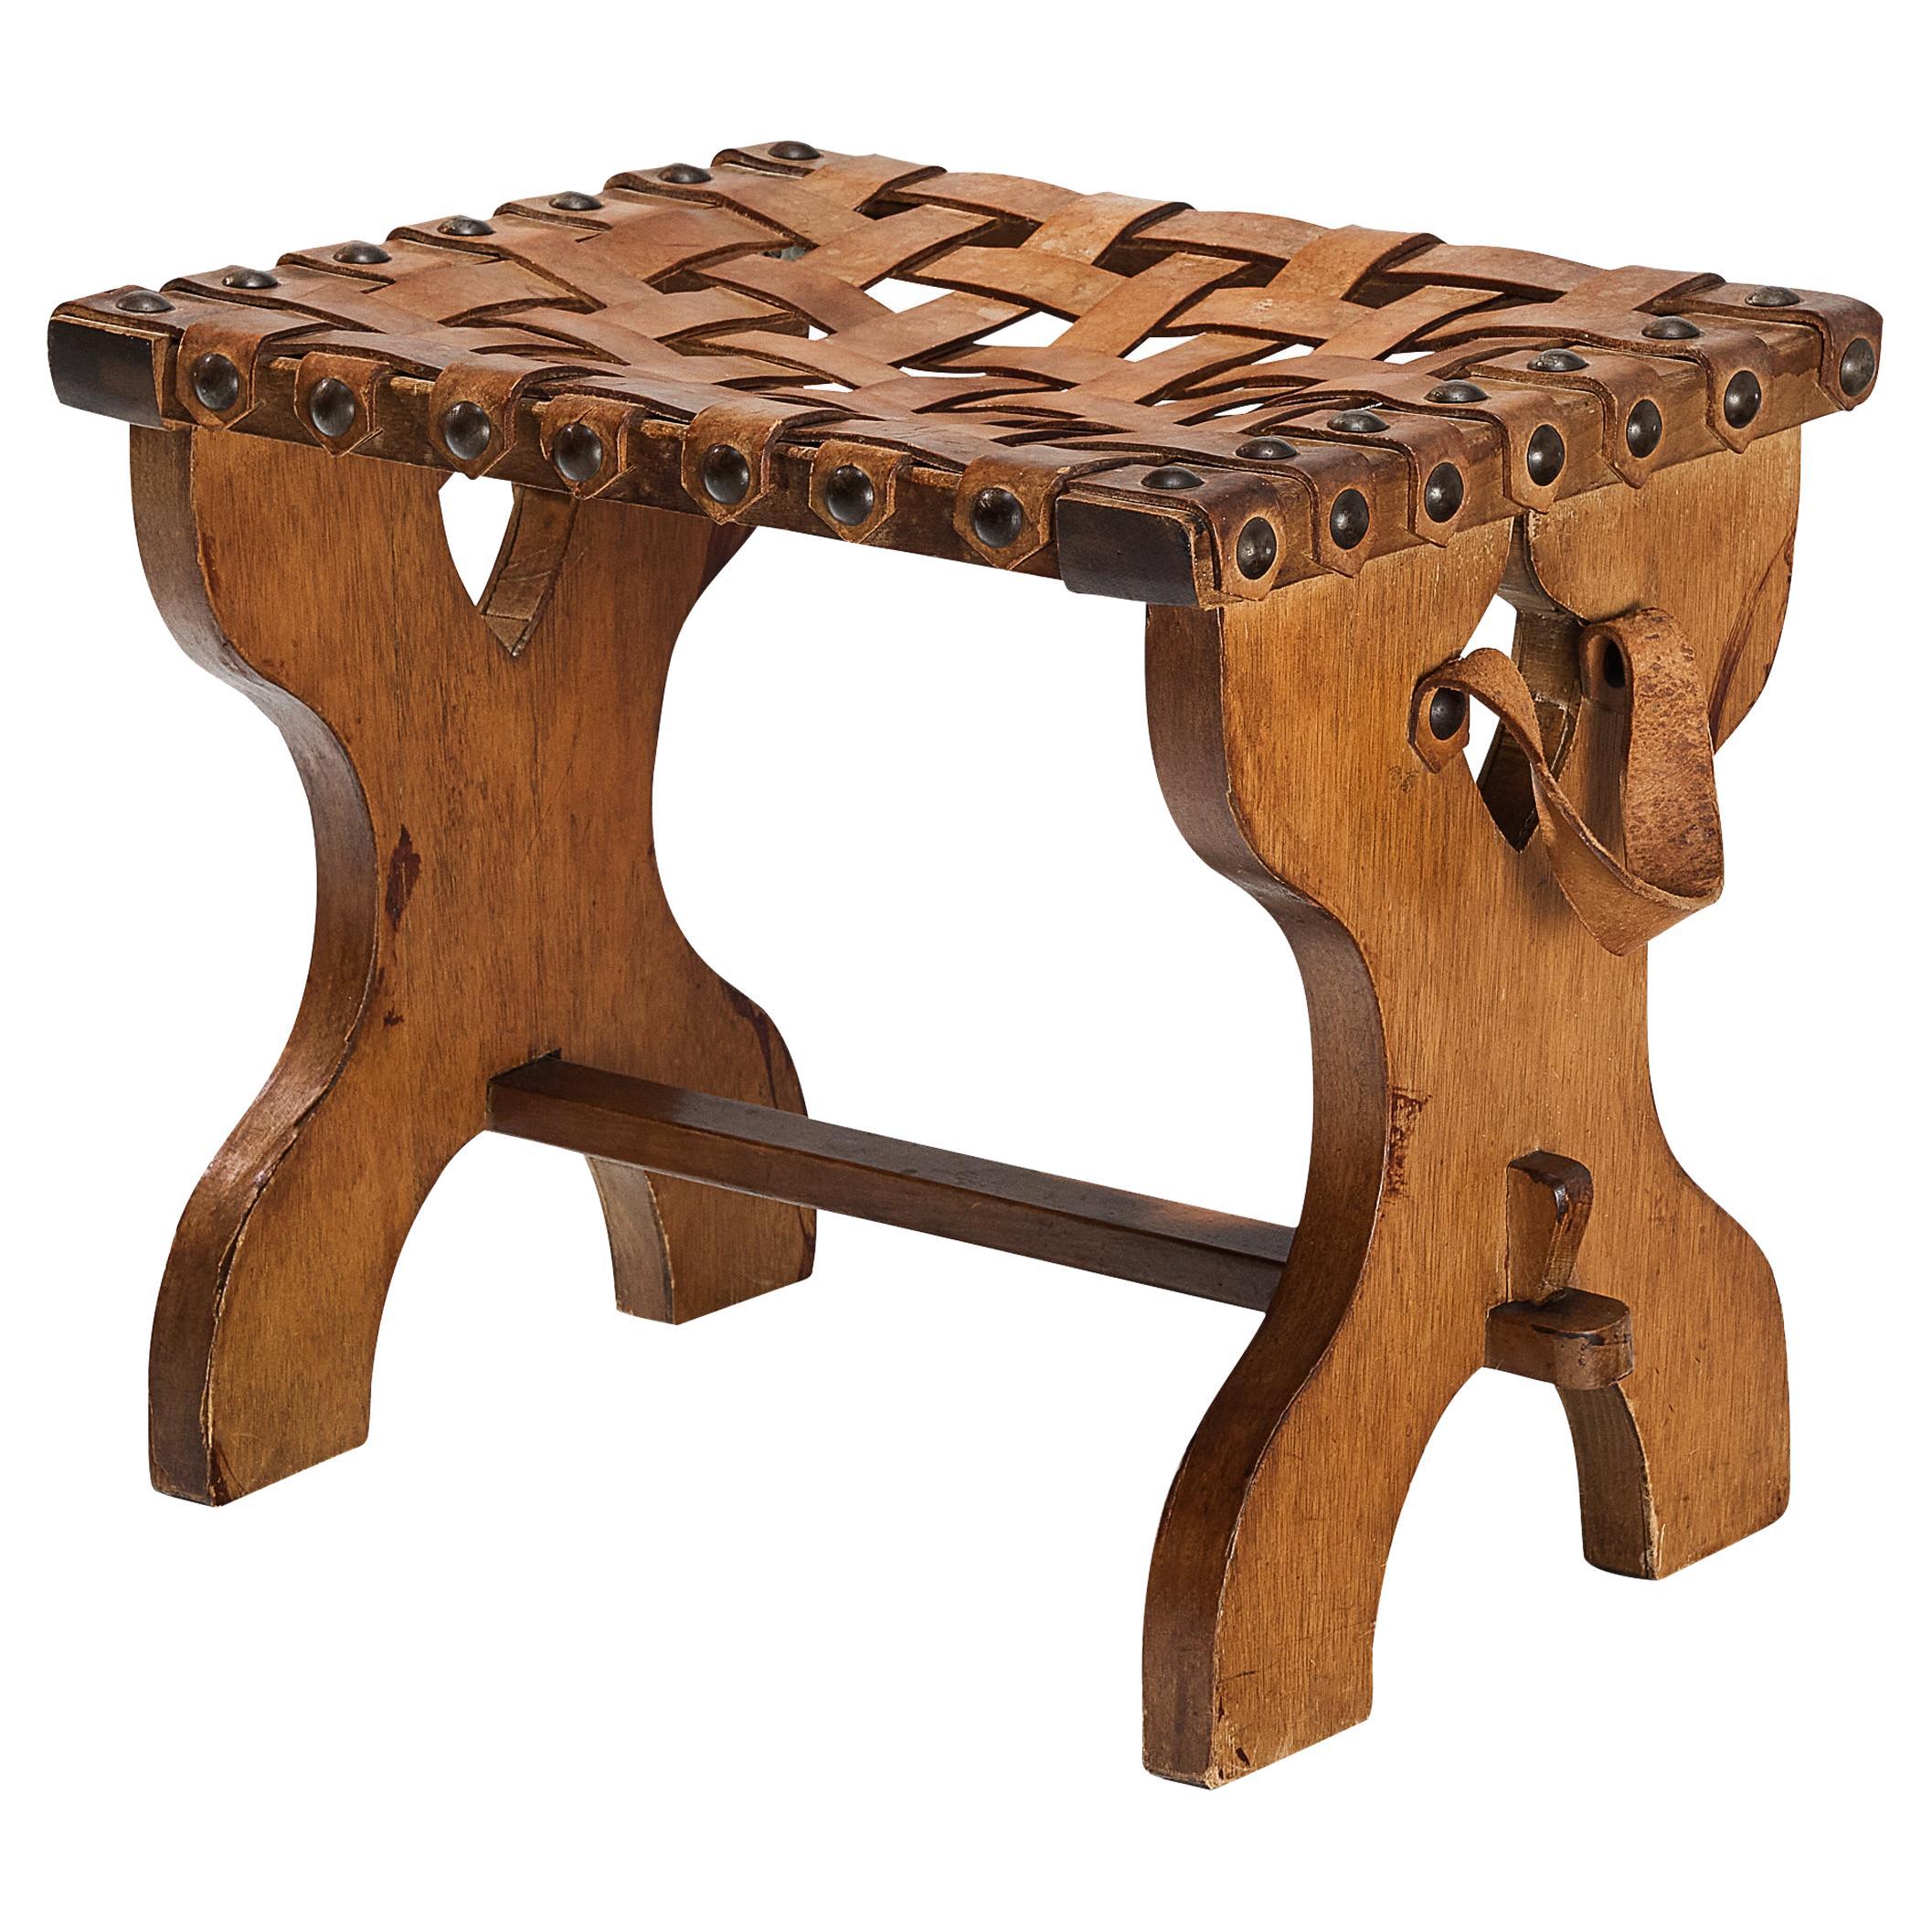 Spanish Stool in Stained Wood with Braided Leather Seat